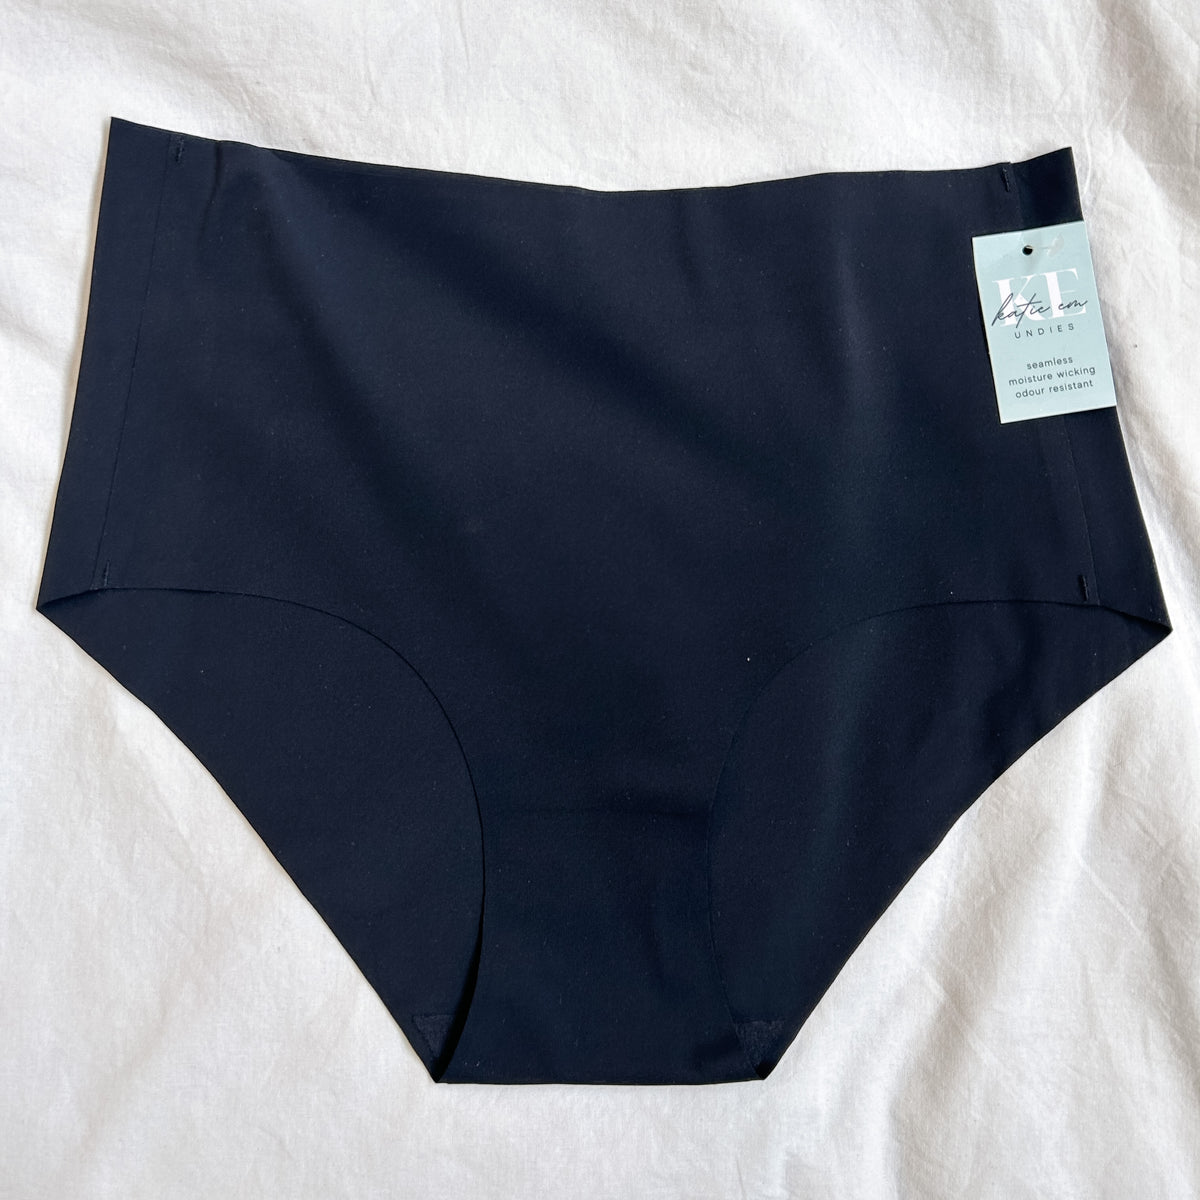 Mid Rise Brief 3 Pack - Size XL